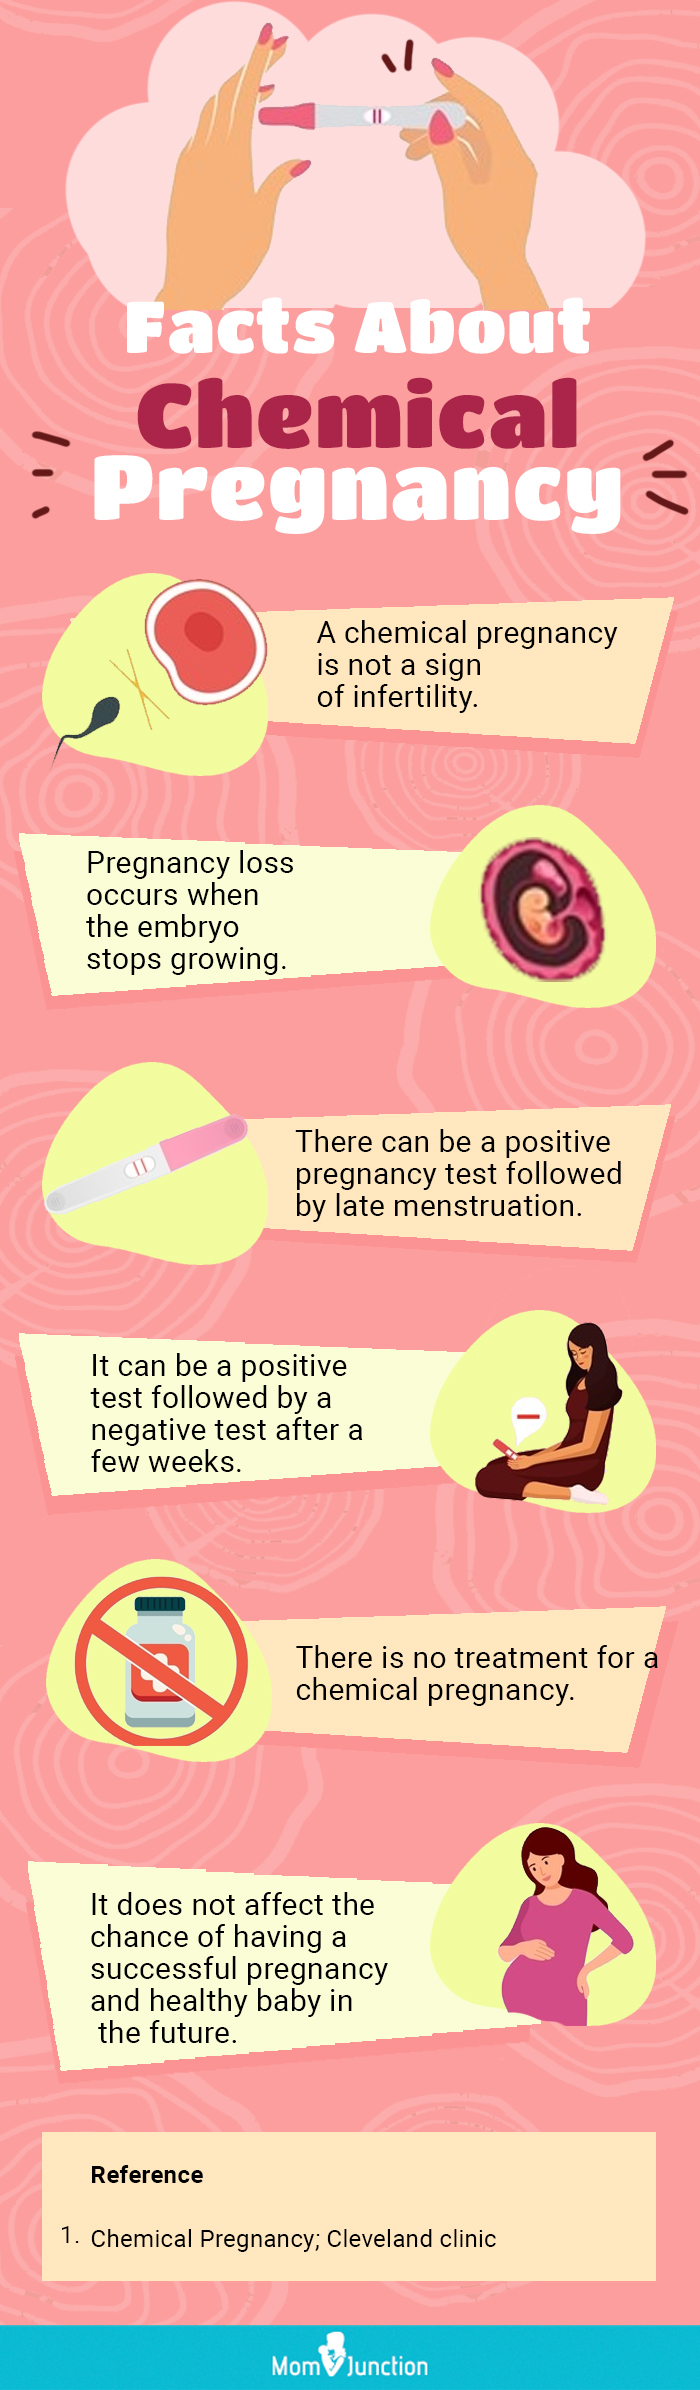 facts about a chemical pregnancy [infographic]